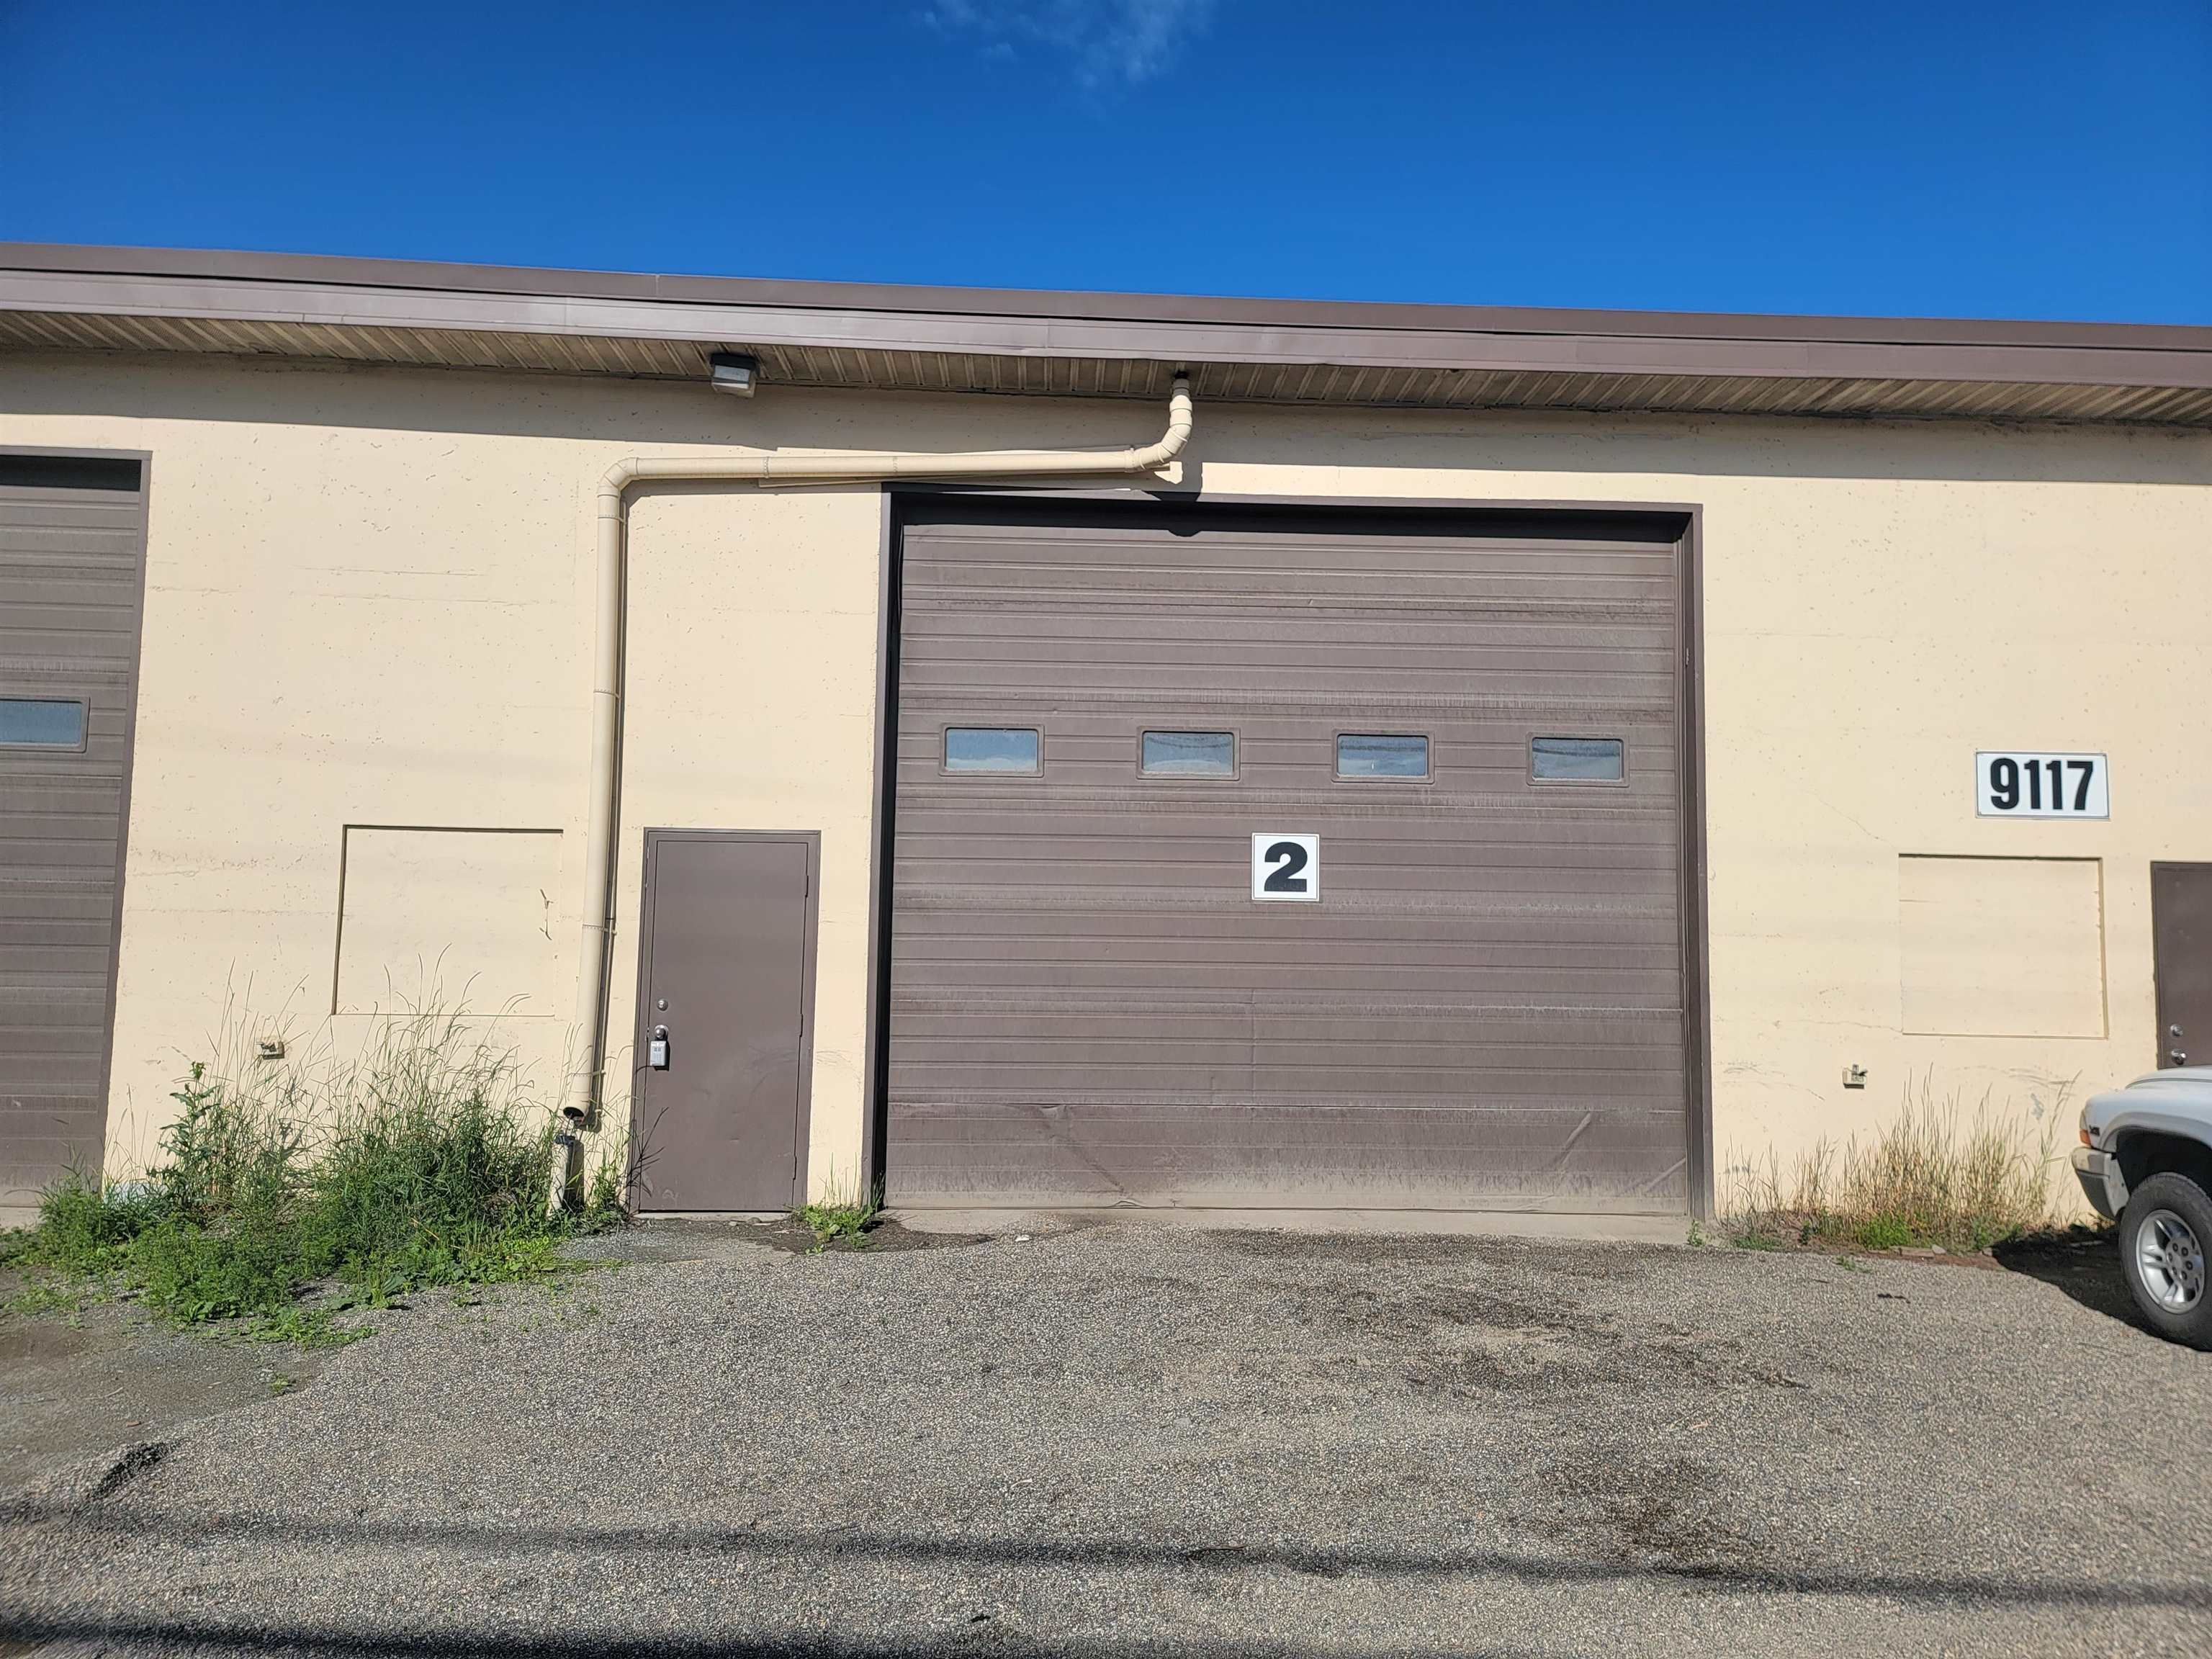 Main Photo: 2 9117 PENN Road in Prince George: Danson Industrial for lease (PG City South East)  : MLS®# C8046120